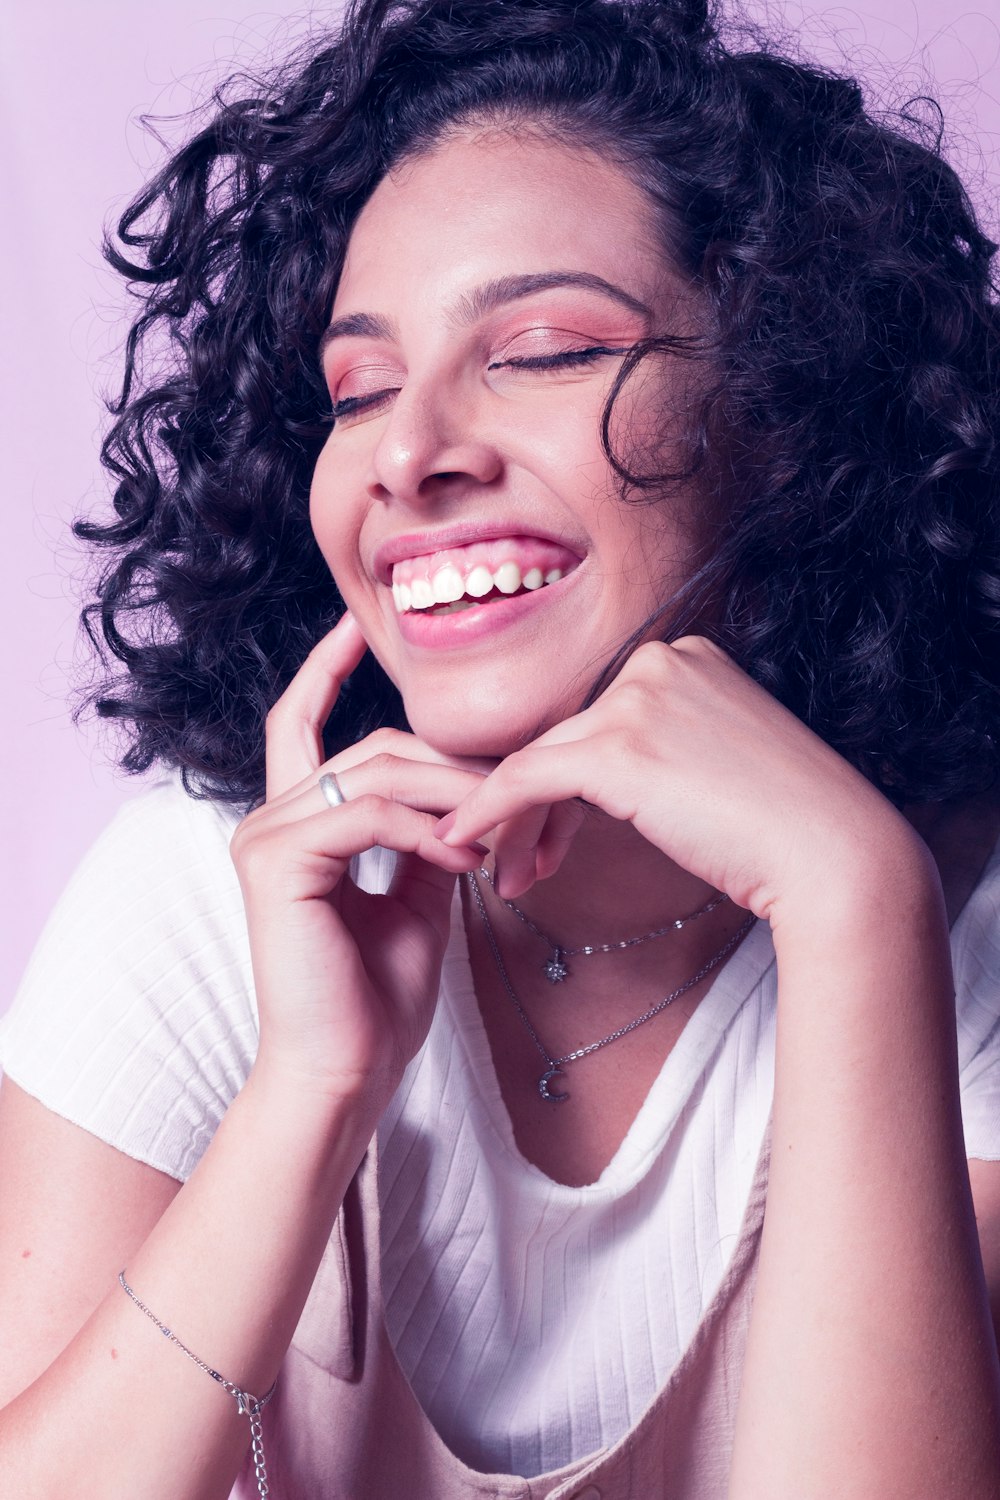 a woman with curly hair is smiling and posing for a picture